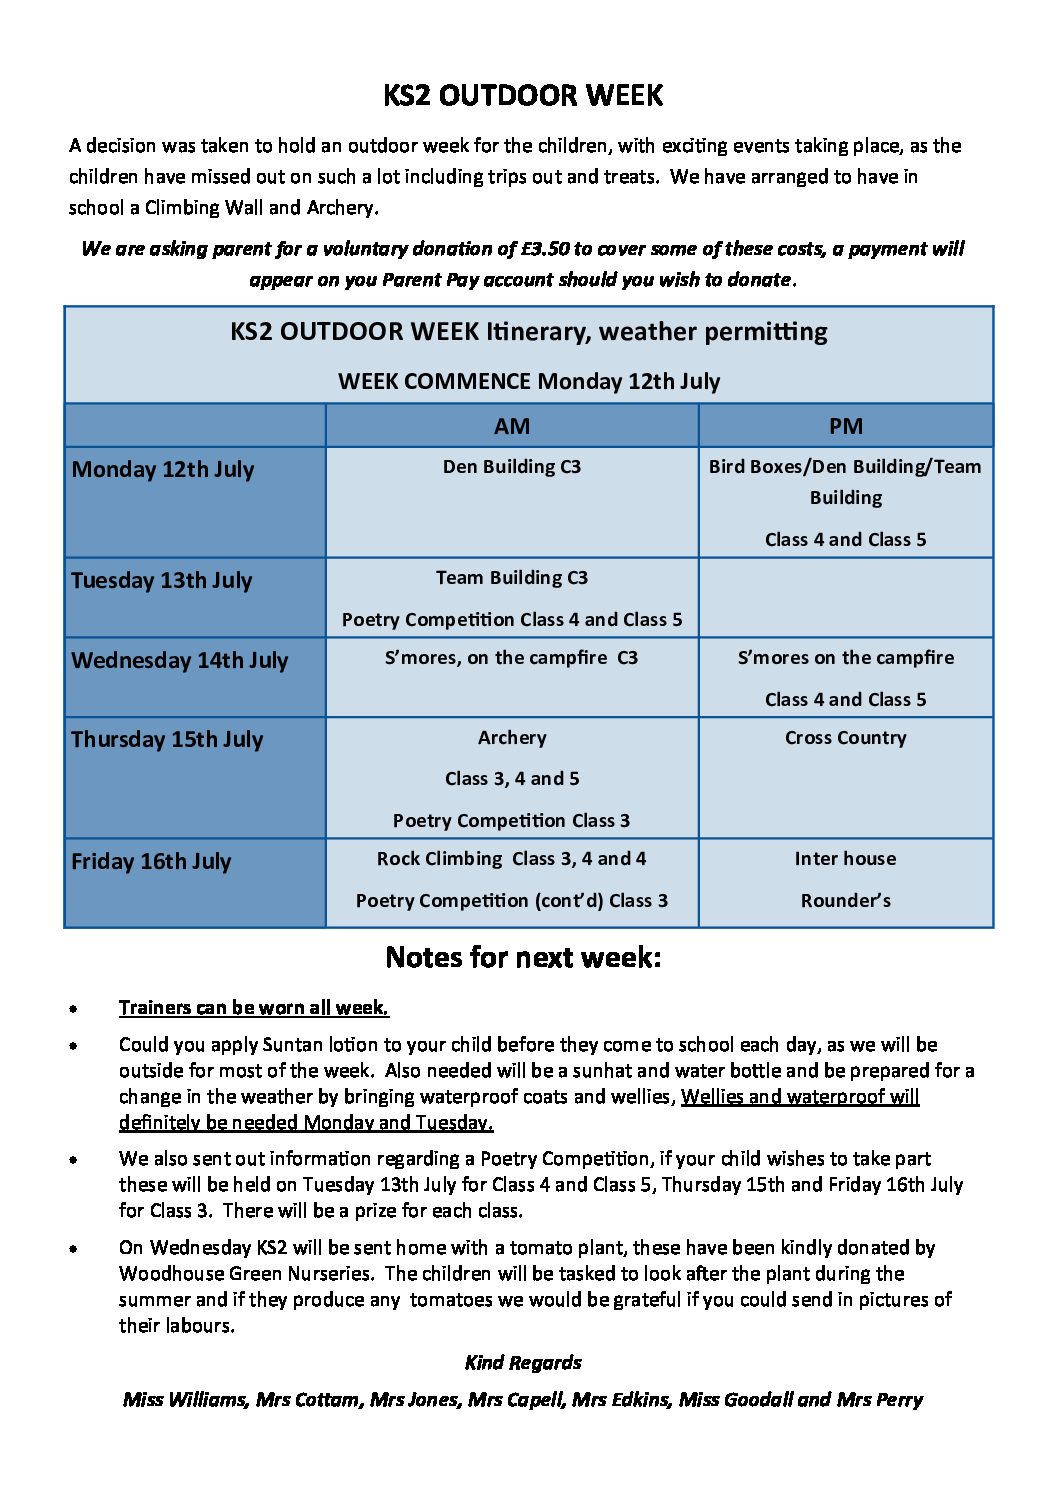 KS2 Itinerary for Outdoor Week commencing Monday 12th July 2021